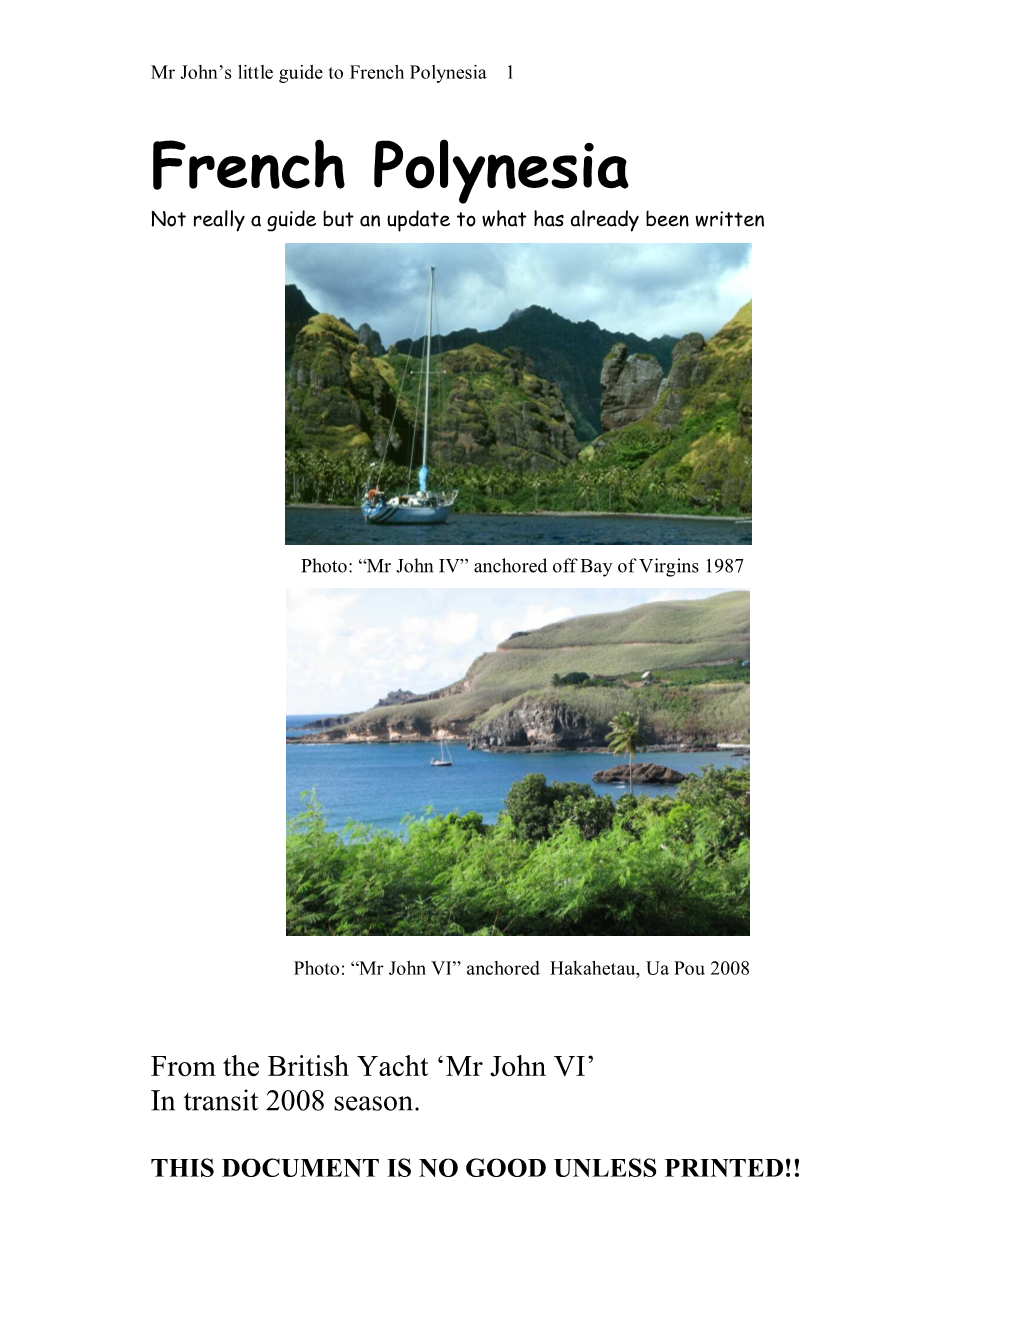 Mr John's Little Guide to French Polynesia